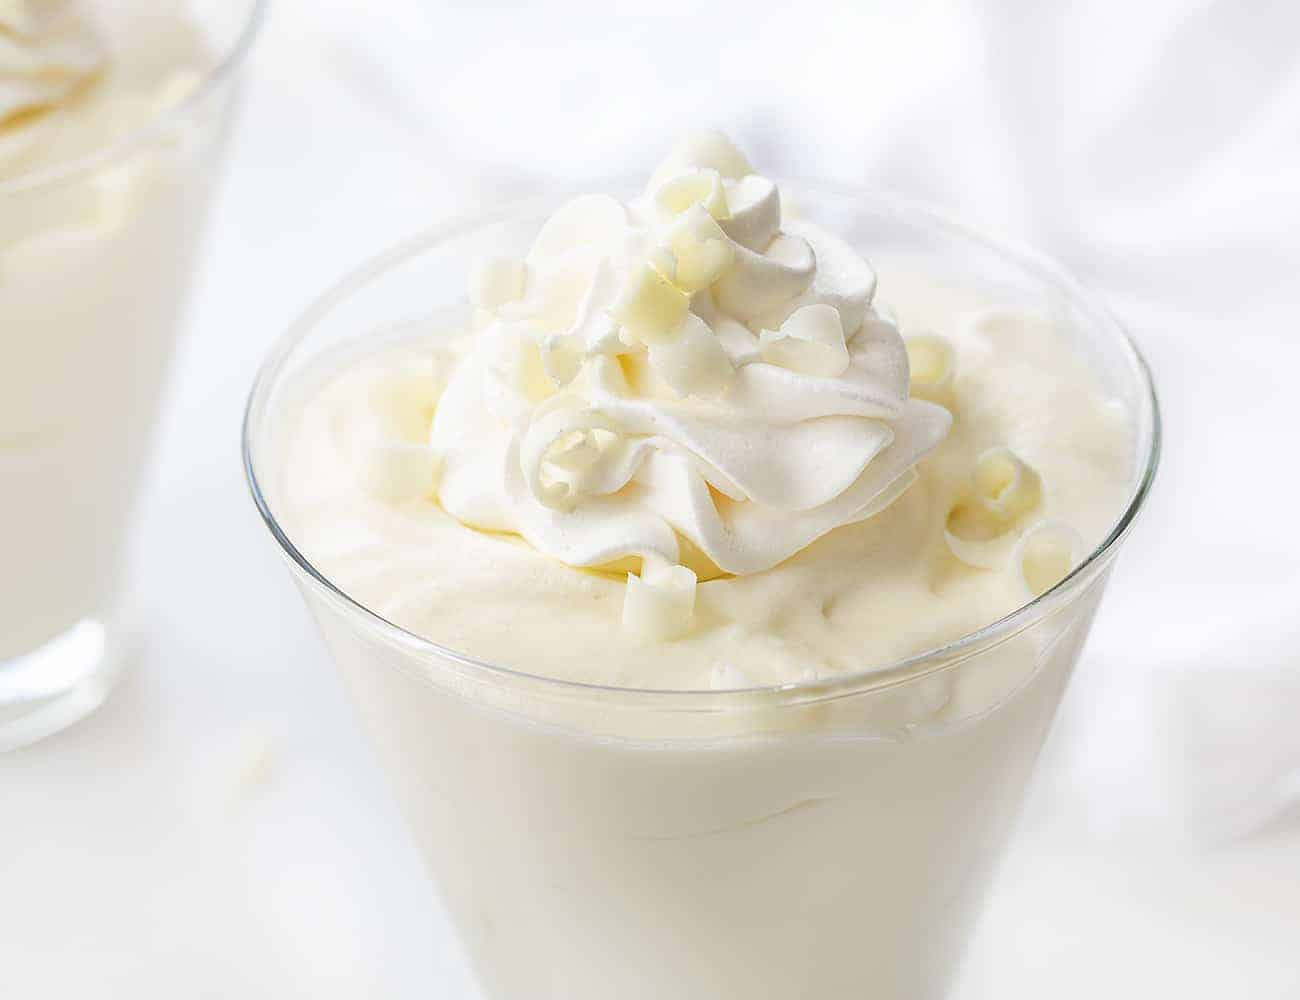 Close up of White Chocolate Mousse with Whipped Cream and White Chocolate Curls on Top